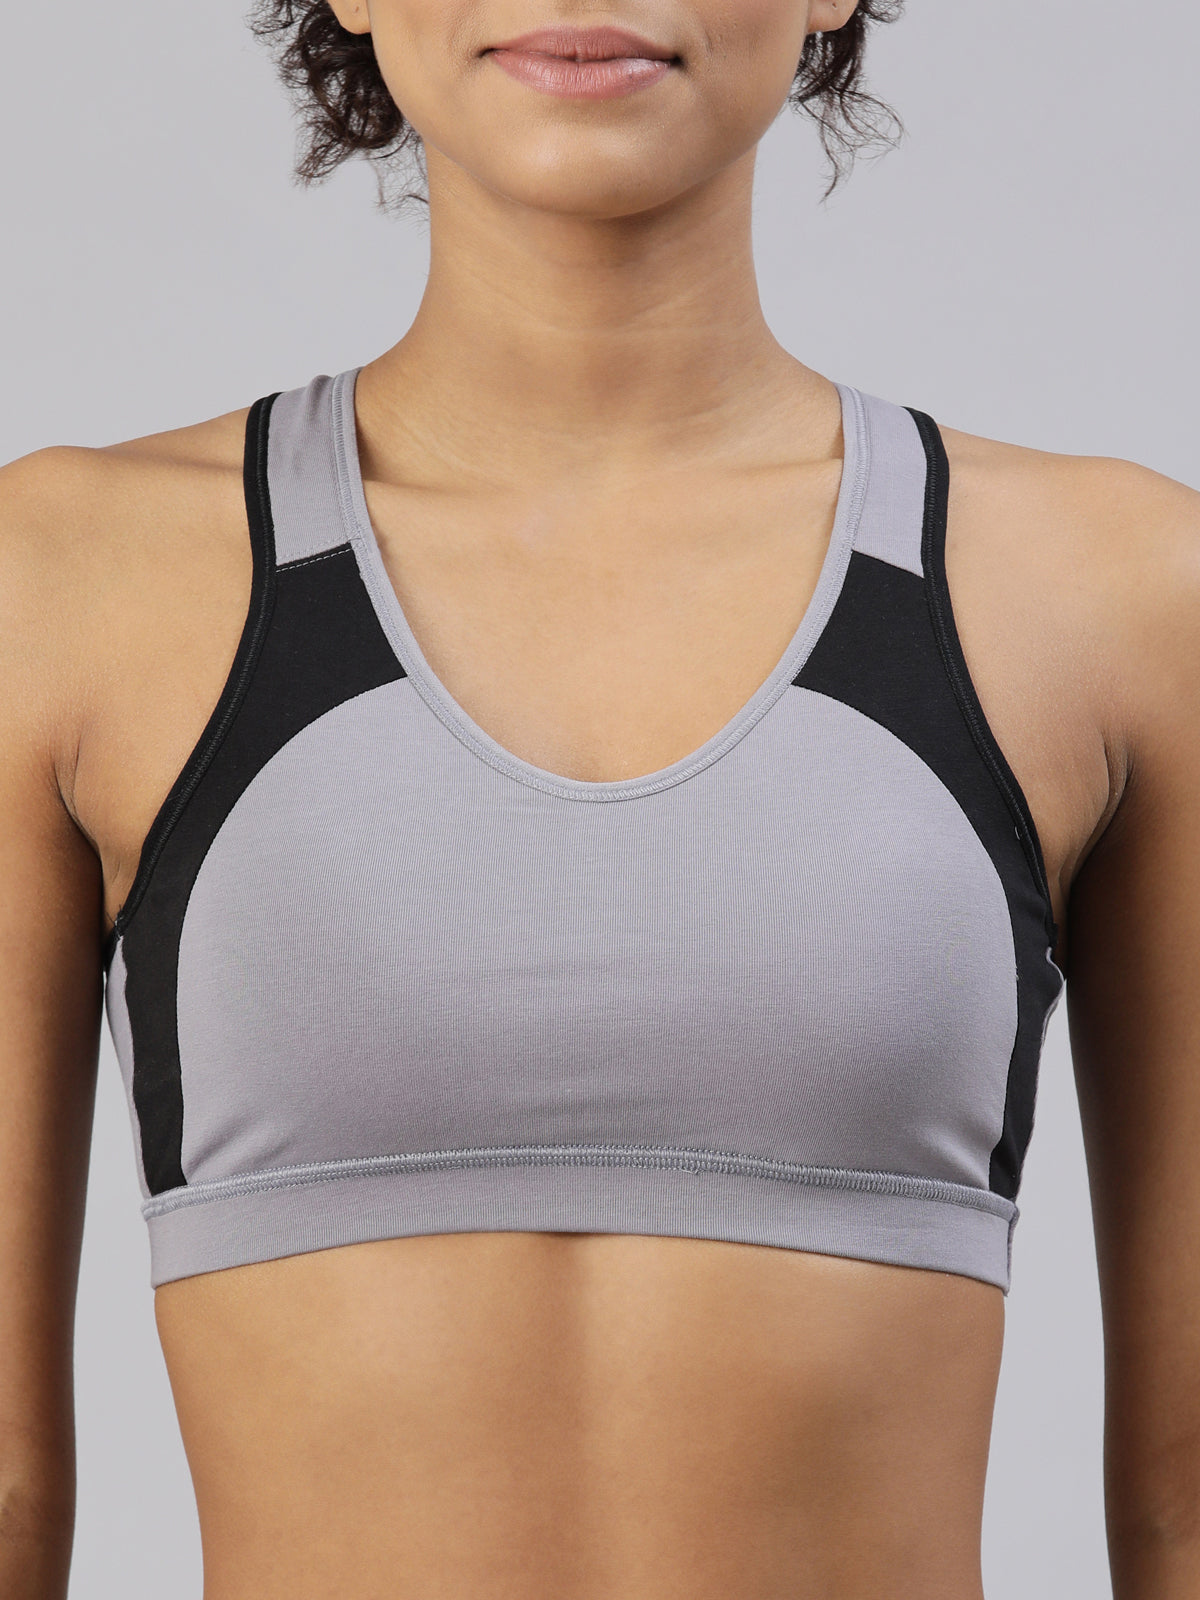 blossom-workout bra-silver grey2-Sports collection-utility based bra